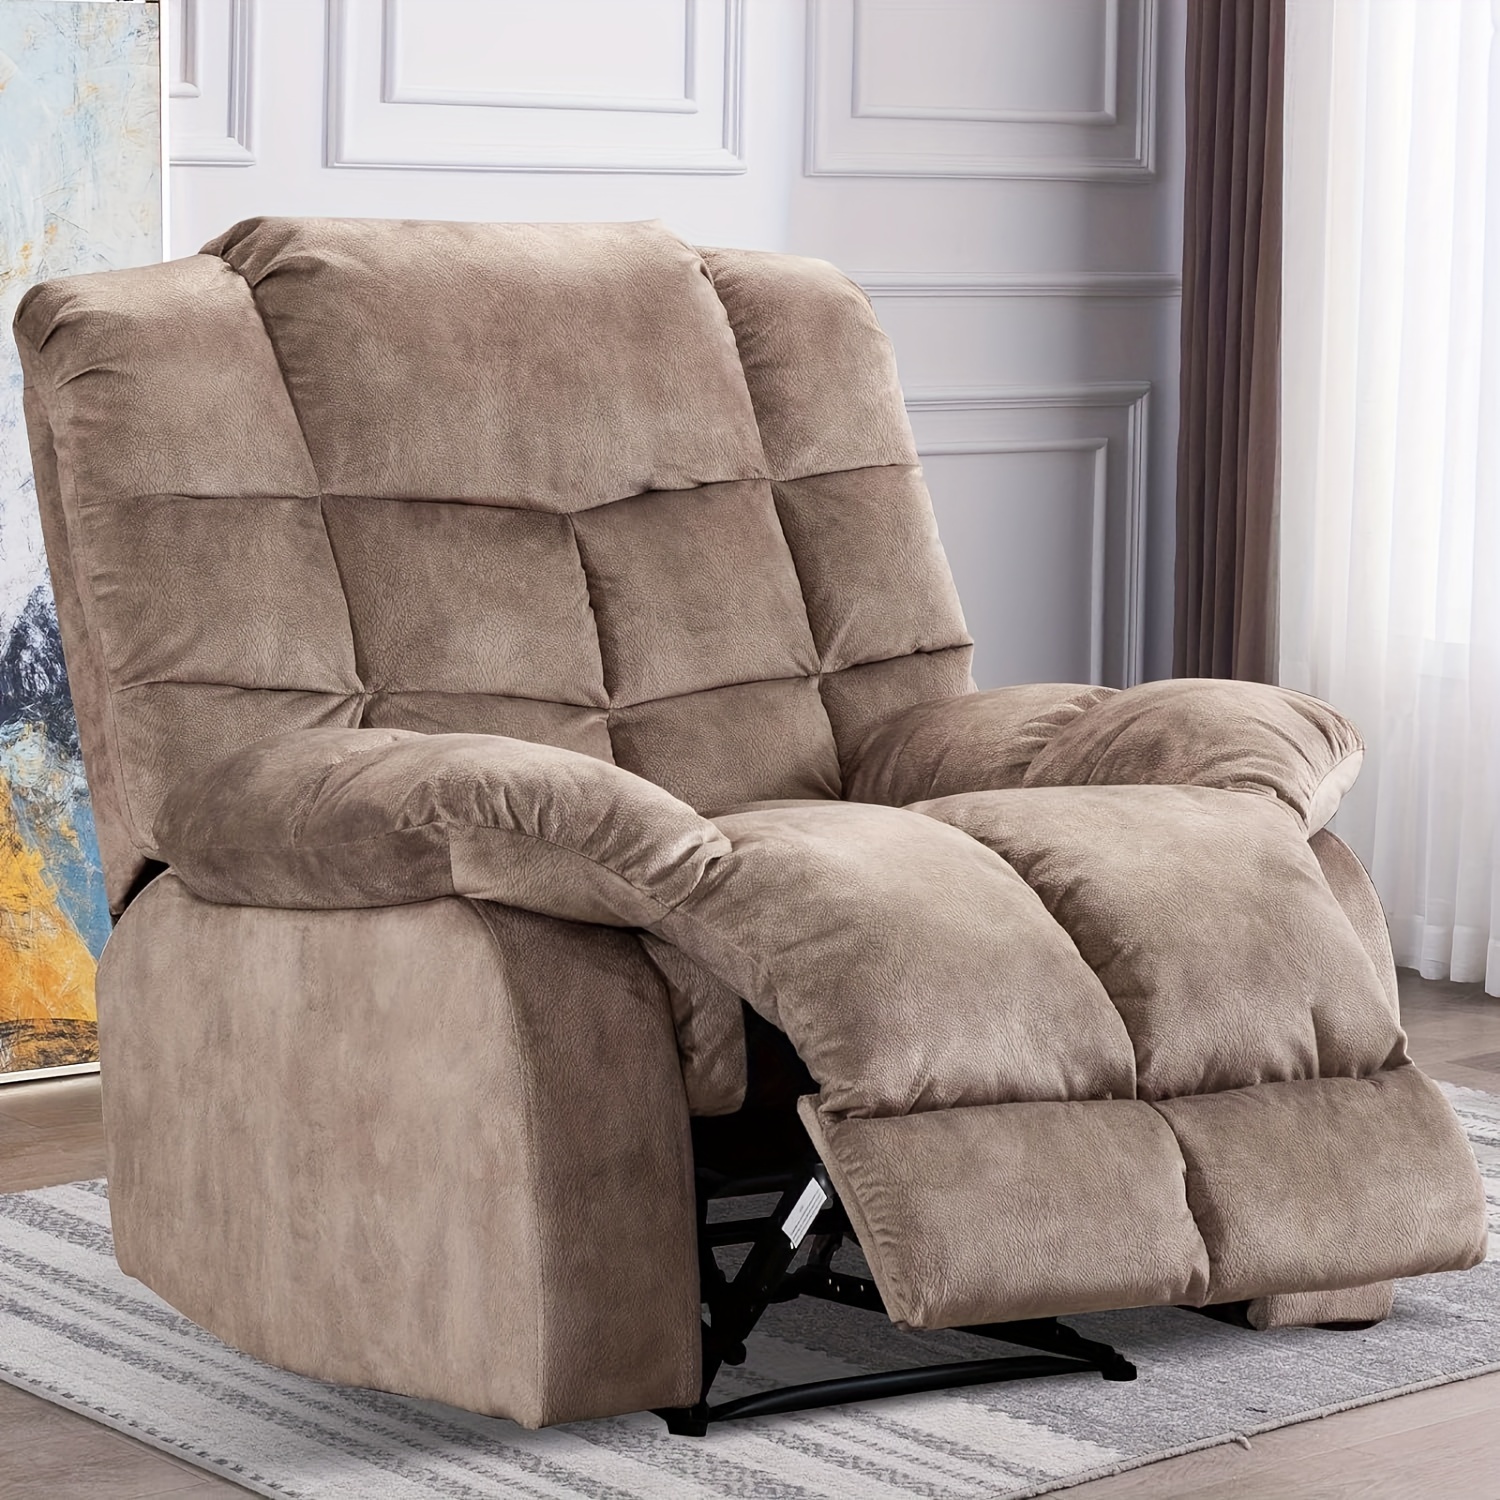 

Single Recliner Chairs For Living Room Overstuffed Breathable Fabric Reclining Chair Manual Sofas